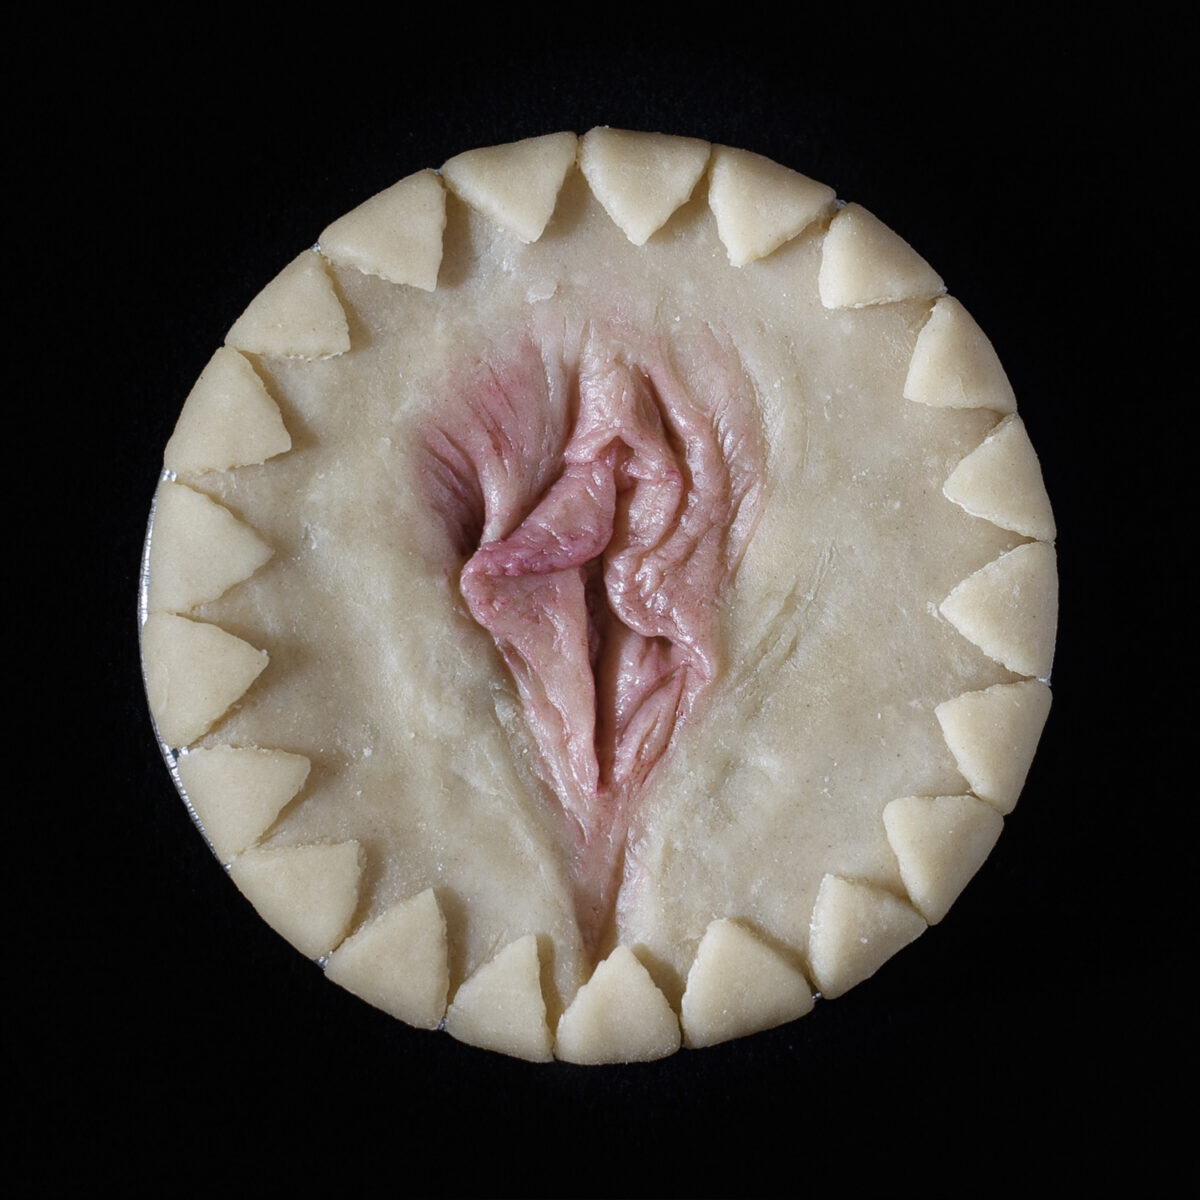 Unbaked cherry pie on a black background. The pie has hand painted vulva art made of real pie dough.